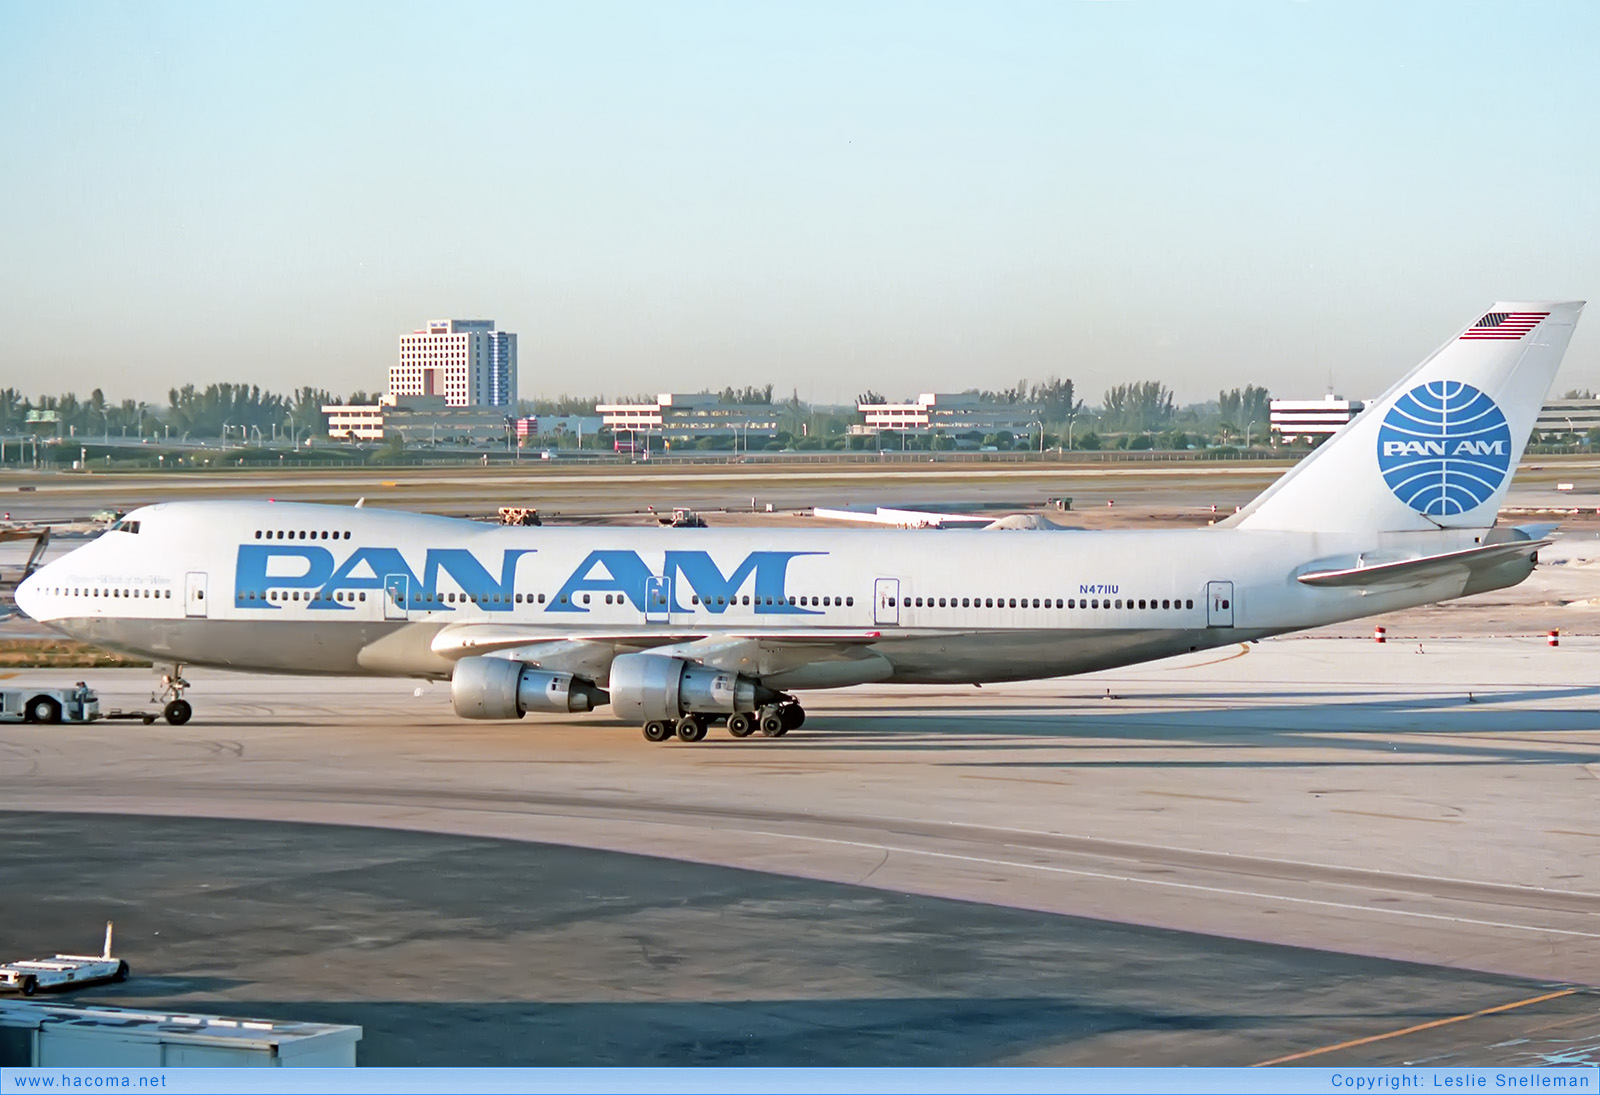 Photo of N4711U - Pan Am Clipper Witch of the Wave - Houston Intercontinental Airport - Mar 17, 1981